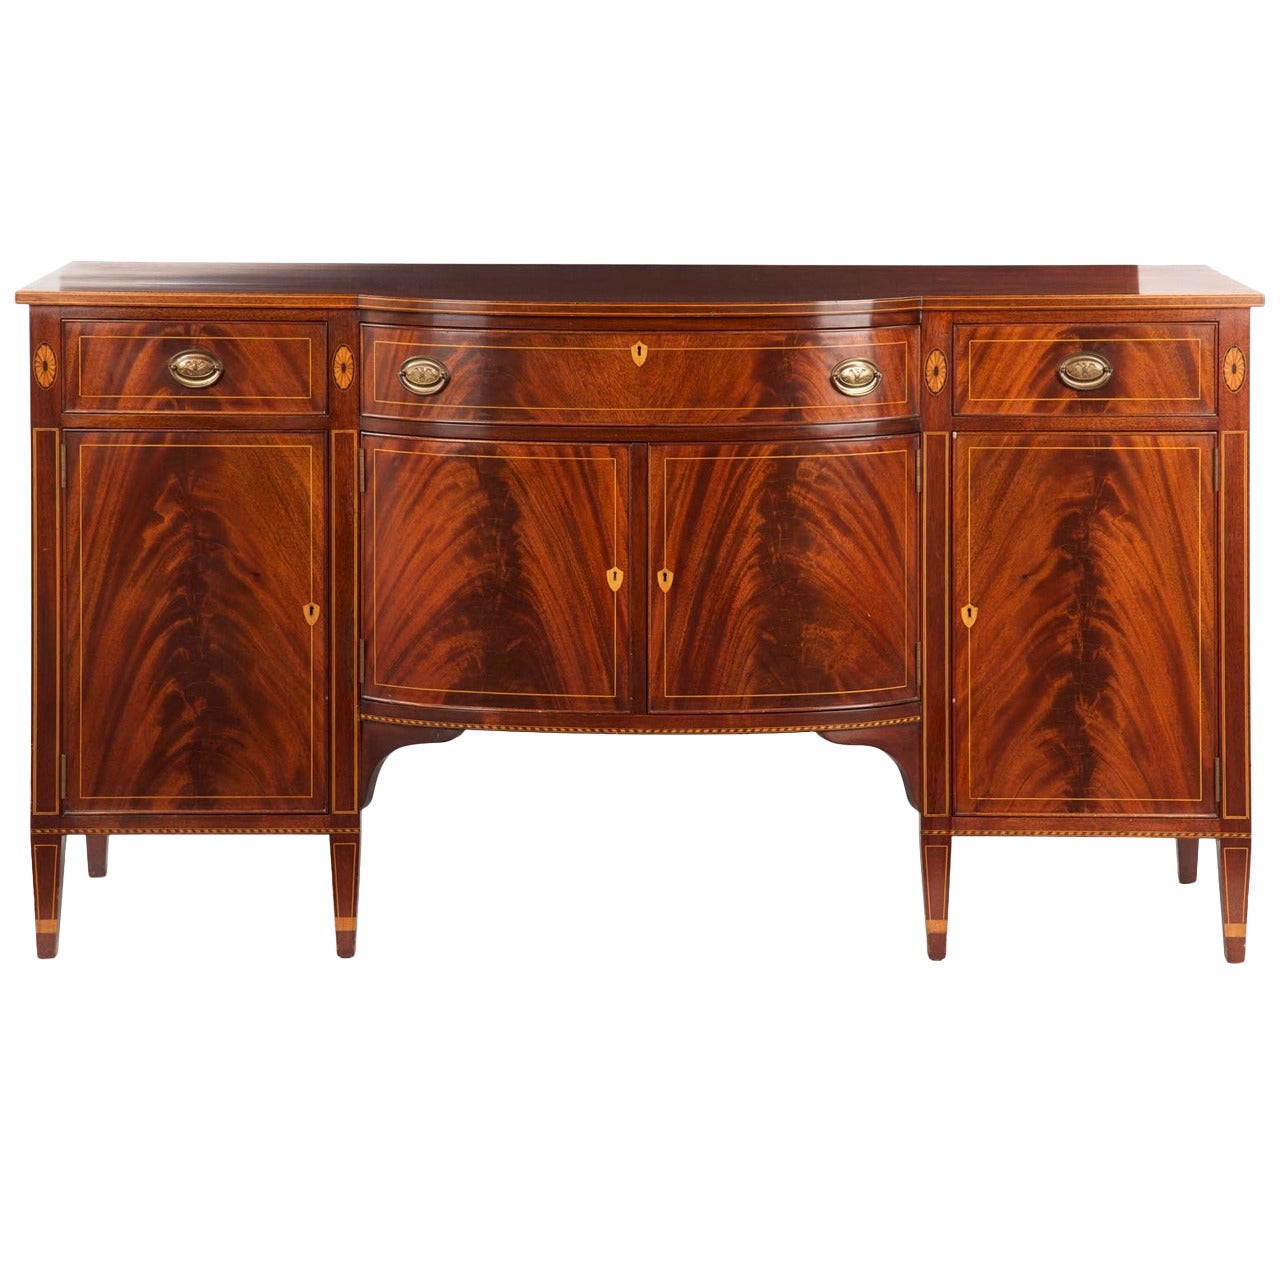 Potthast Brothers American Federal Style Mahogany Sideboard, 20th Century